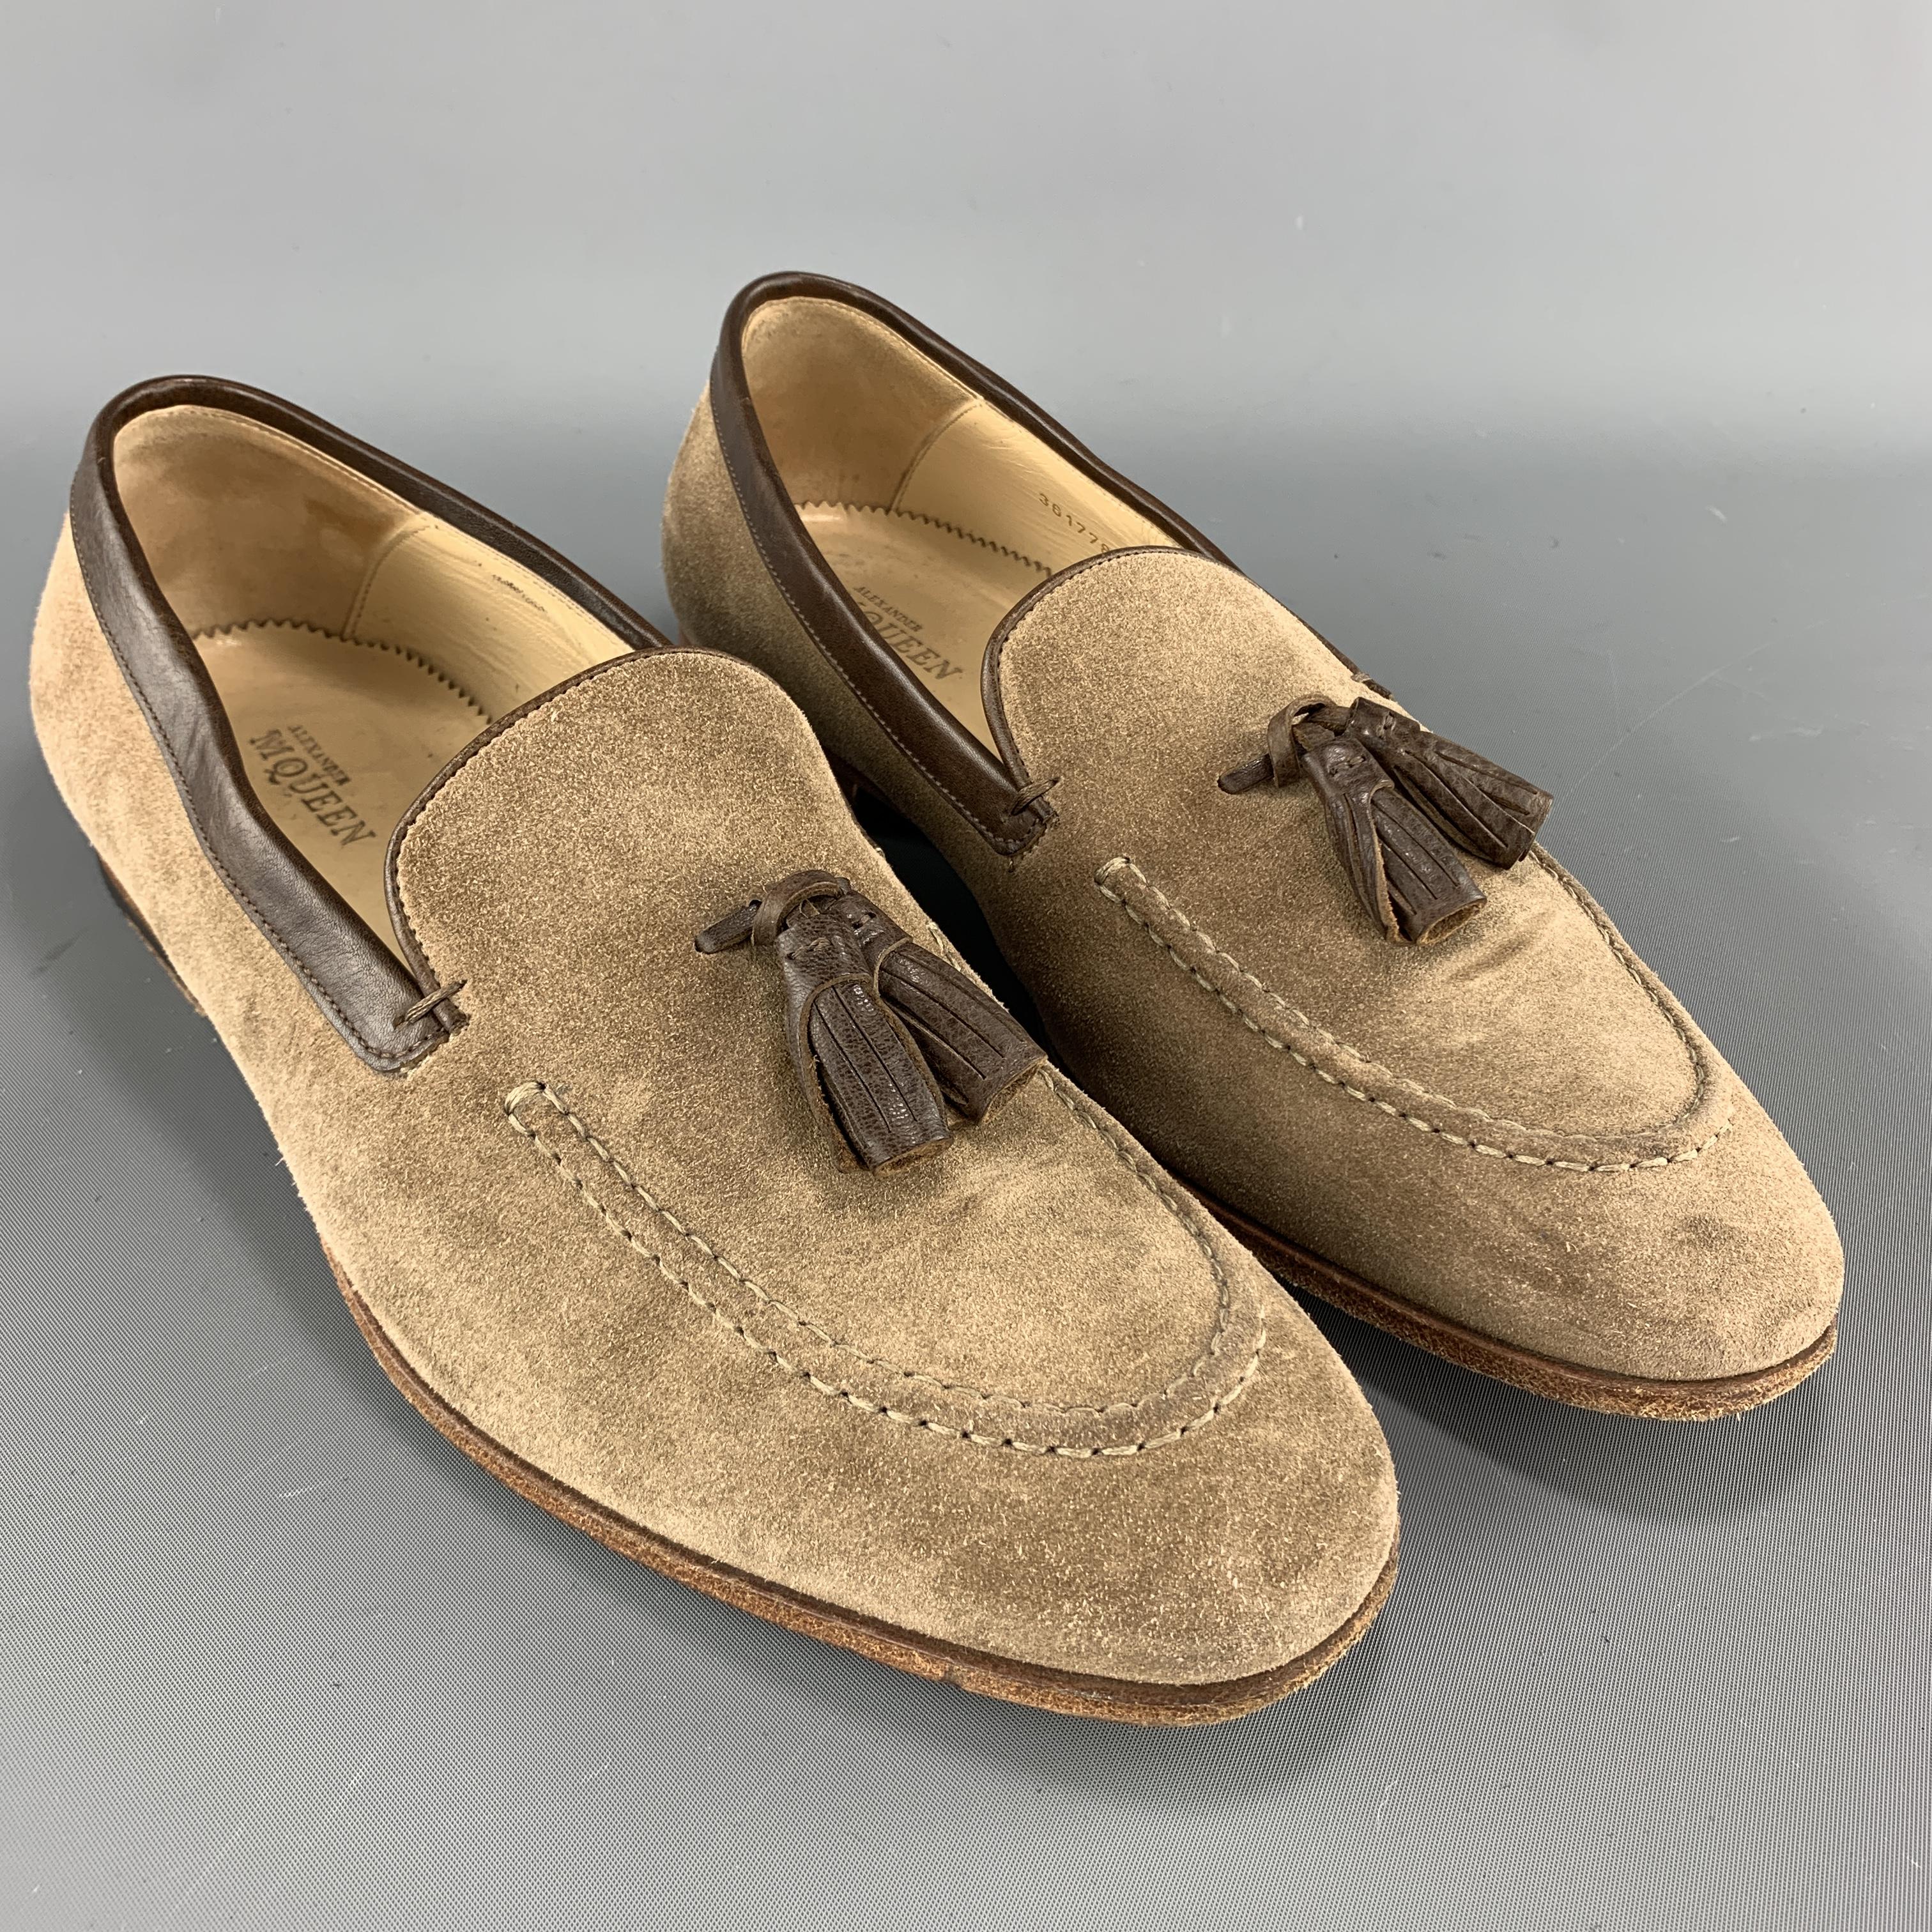 ALEXANDER MCQUEEN loafers come in beige suede with brown leather trim and tassels.  Made in Italy.

Good Pre-Owned Condition.
Marked: IT 42

Outsole: 11.75 x 3.75 in.